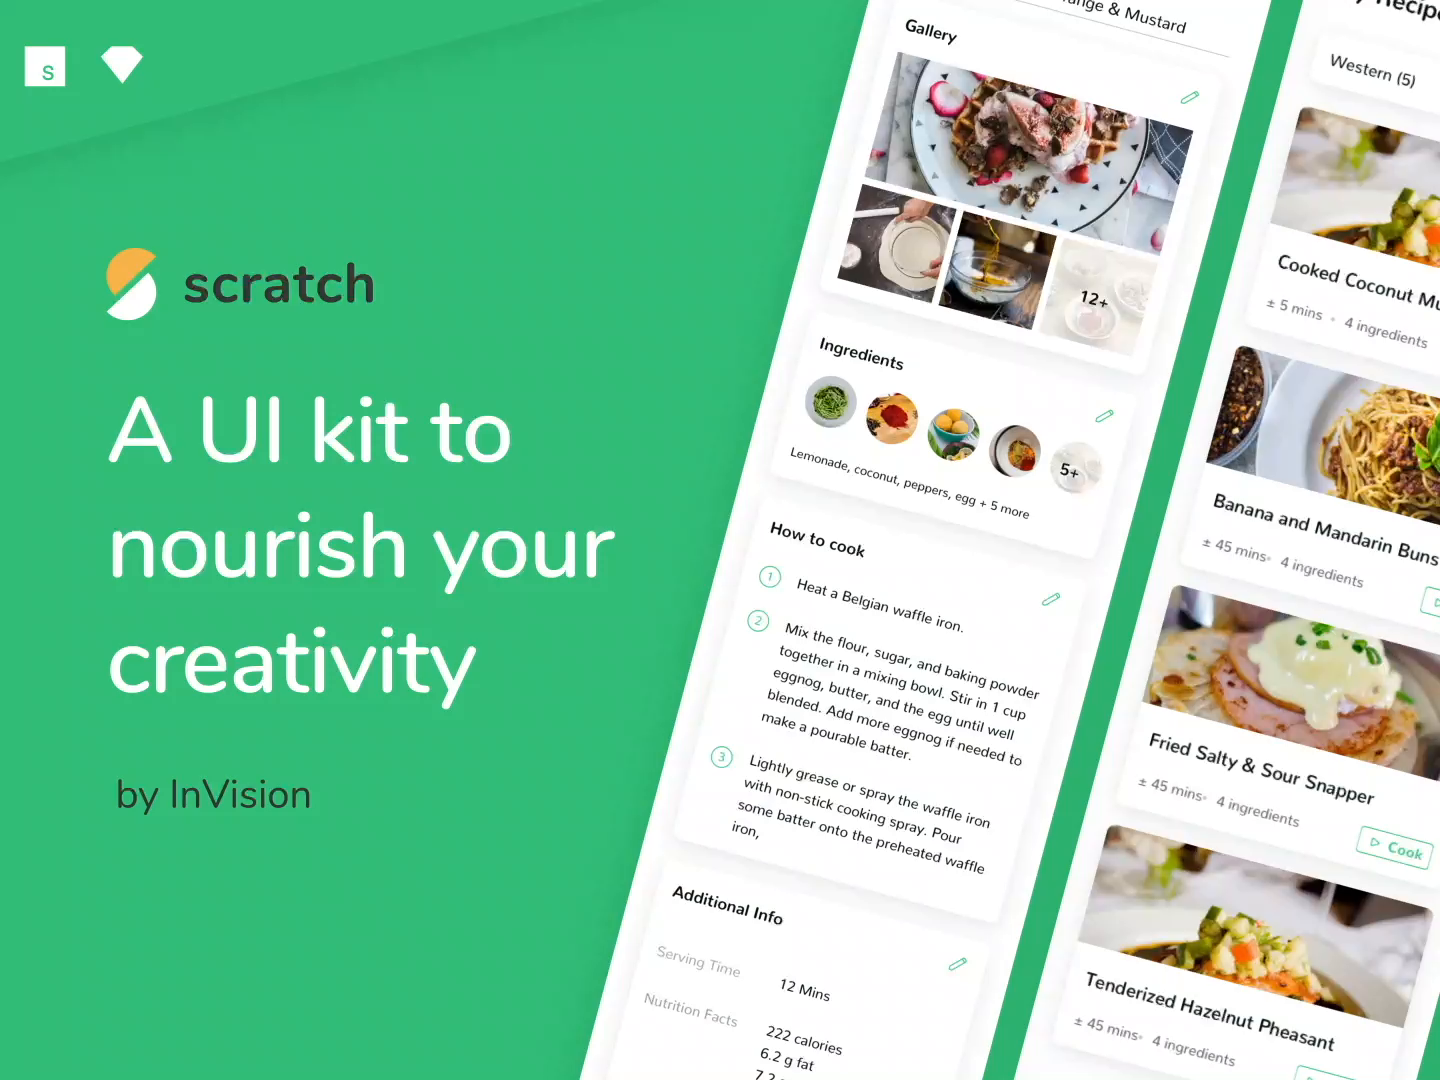 UI Kits design idea #226: Scratch—A UI Kit to nourish your creativity by InVision